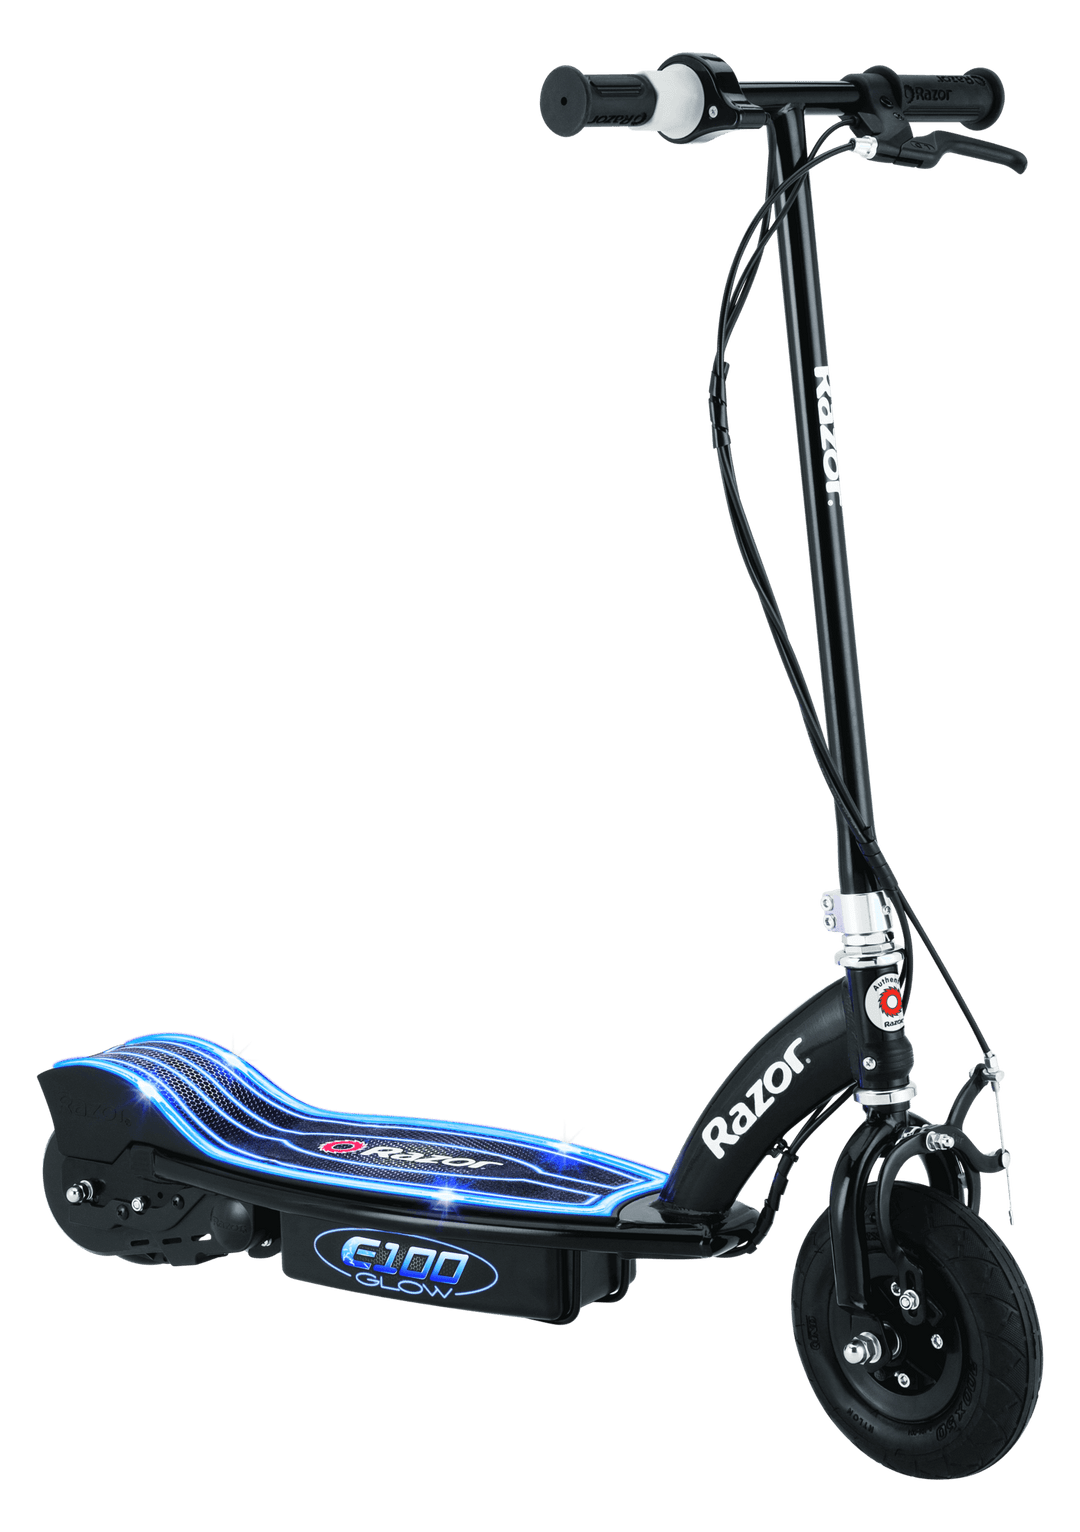 E100 Glow Electric Scooter